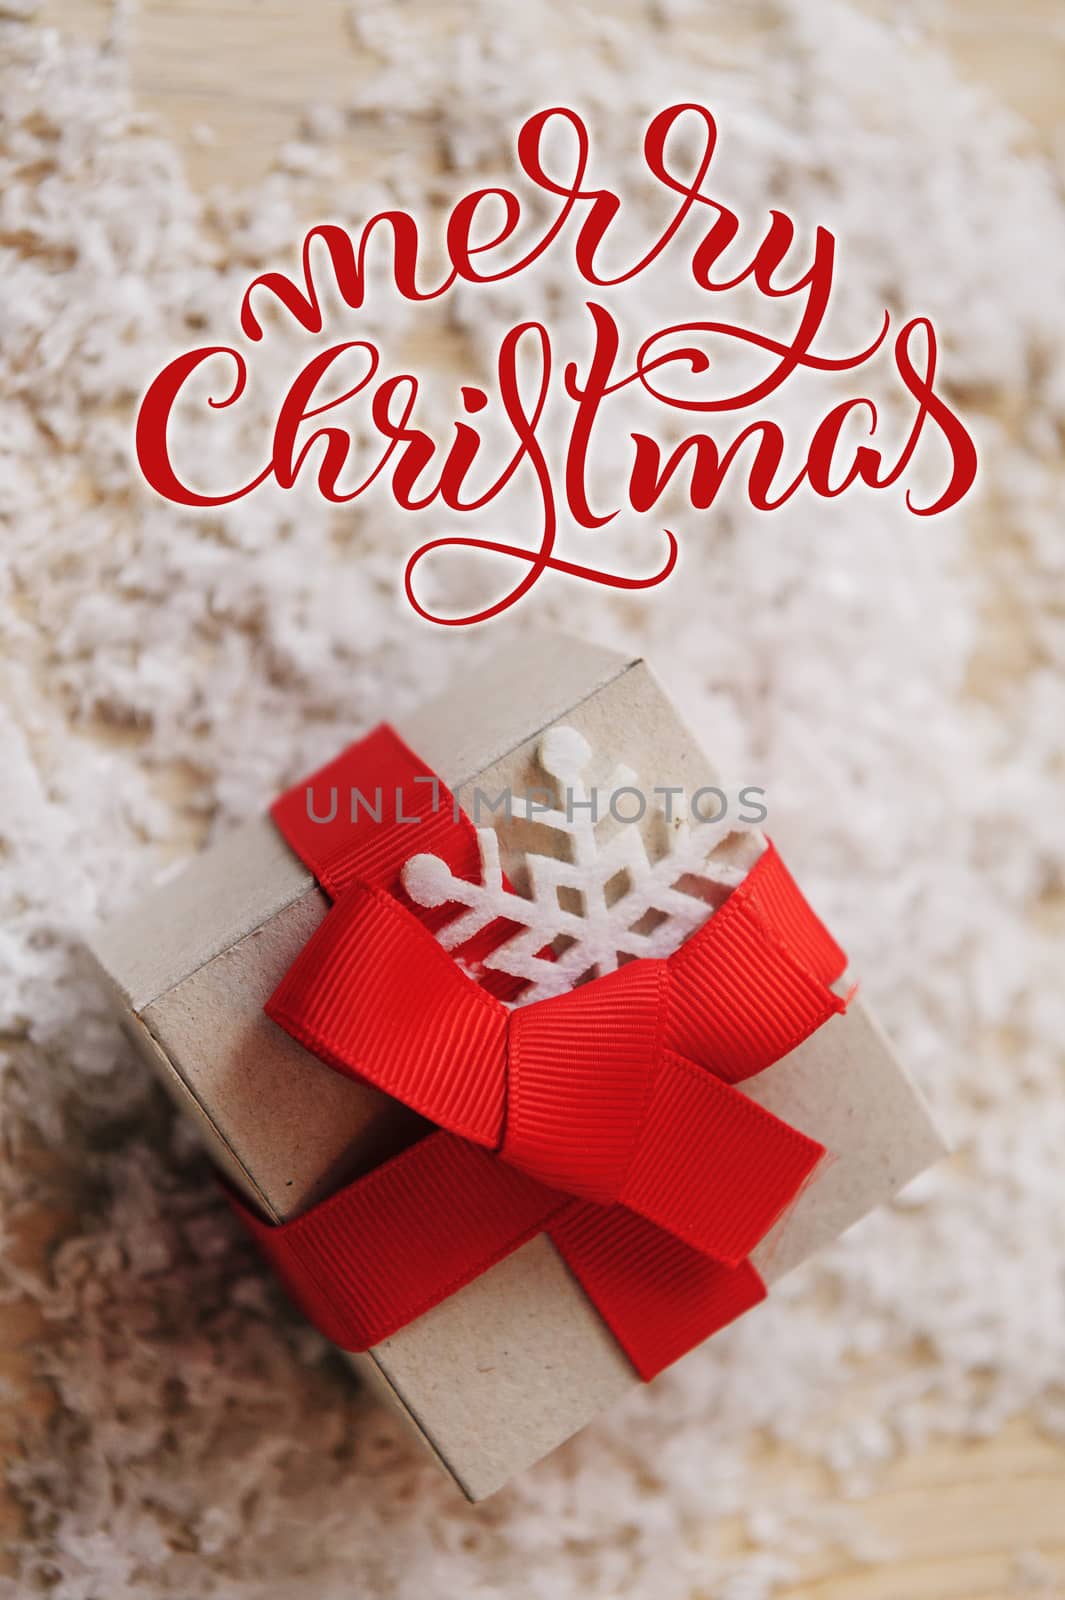 gift box of kraft paper with Red Ribbon and Merry Christmas text. Calligraphy lettering.